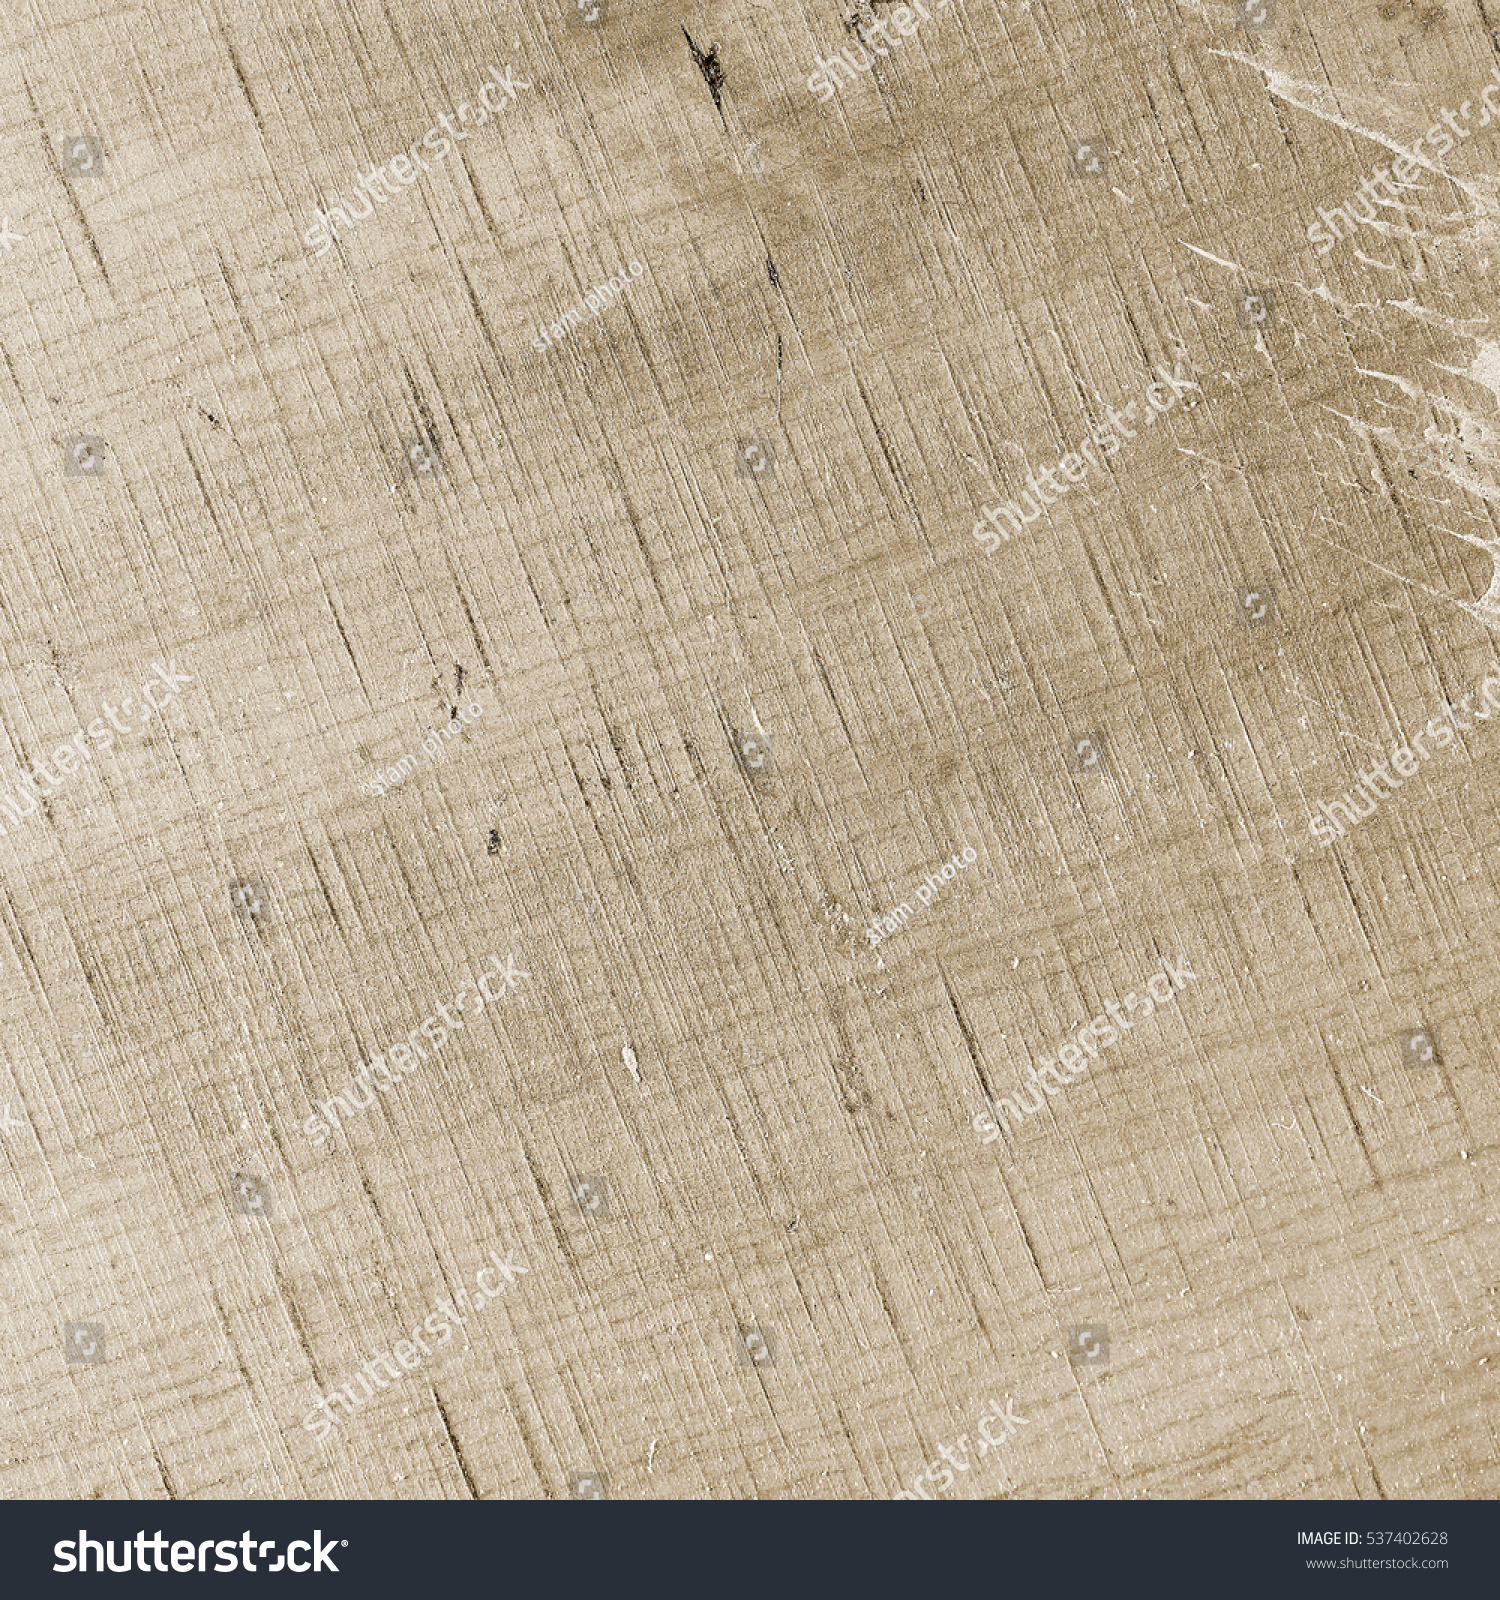 Old Dirty Fabric Textured Background Stock Photo 537402628 ...